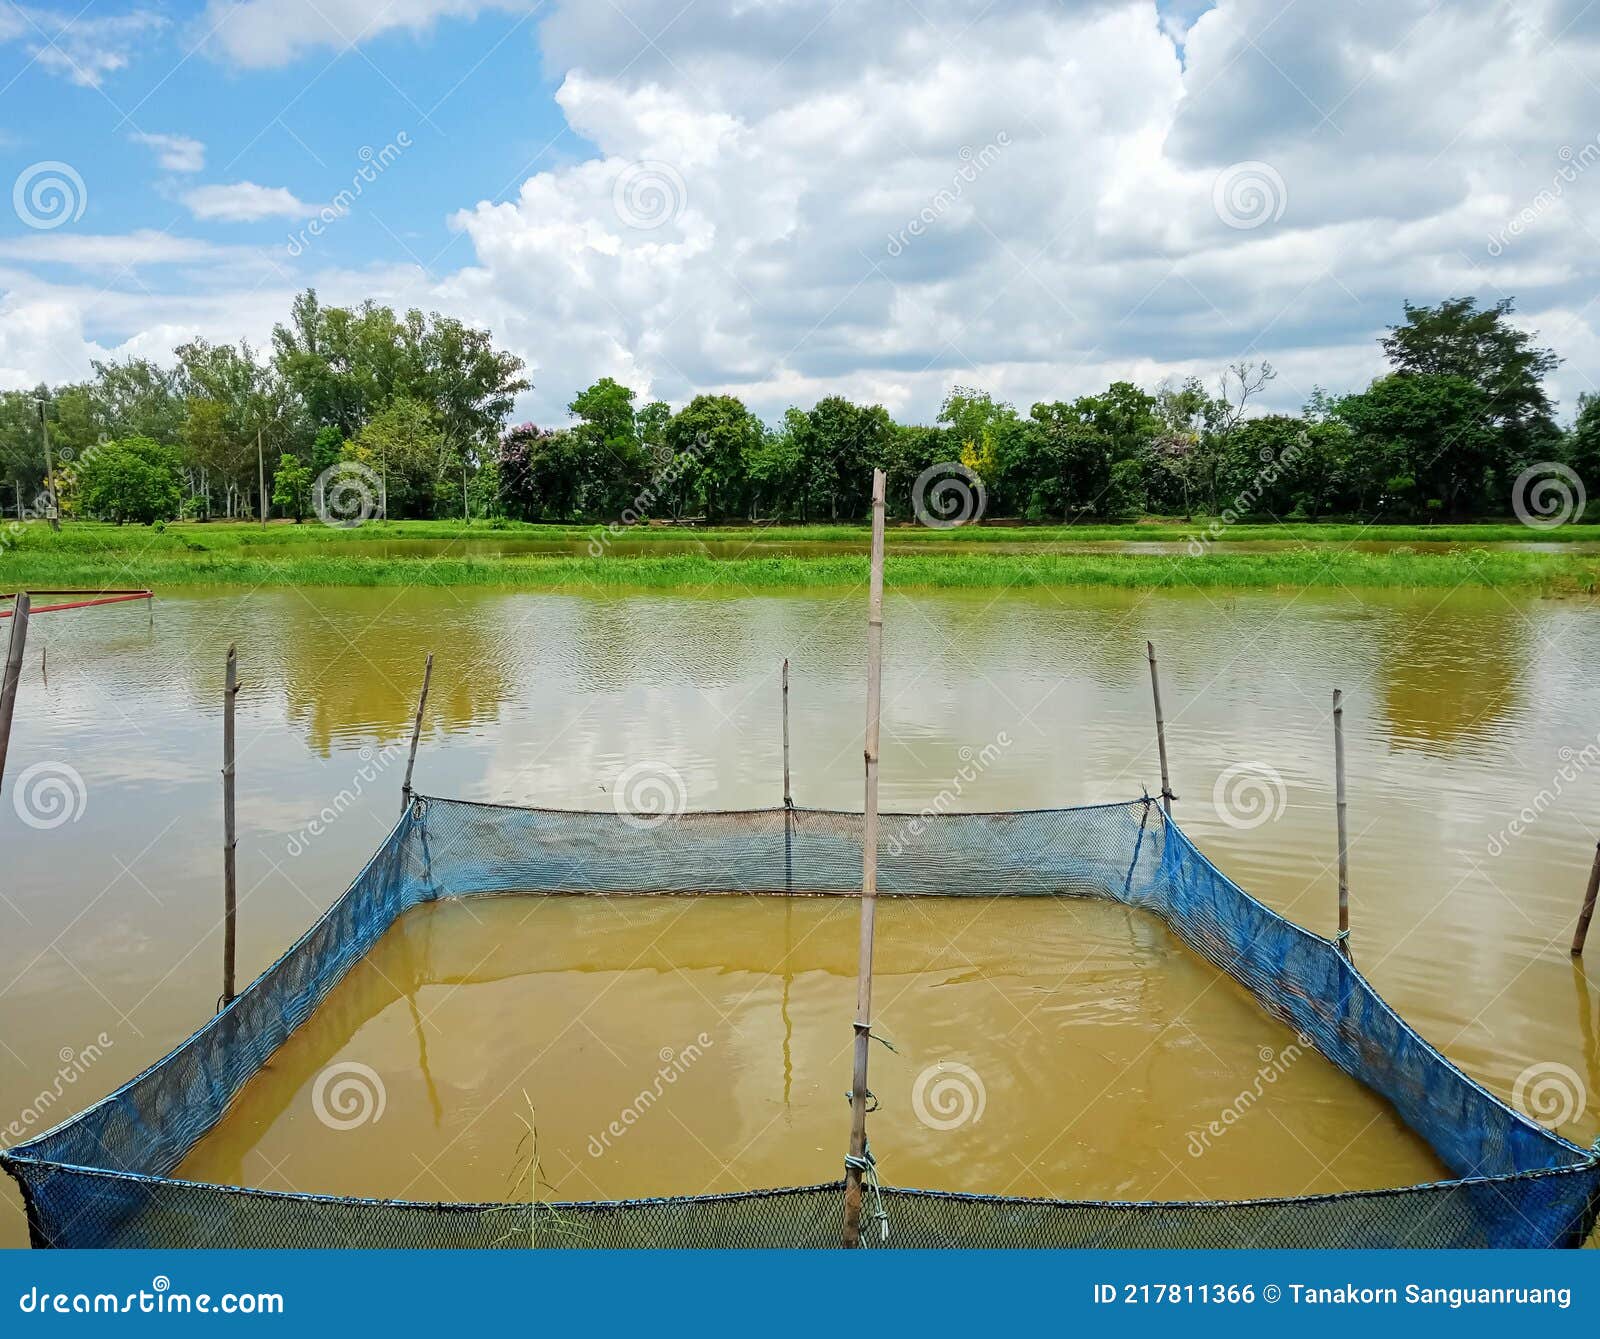 The Tilapia Fish Cage Culture Stock Photo - Image of fishery, asia